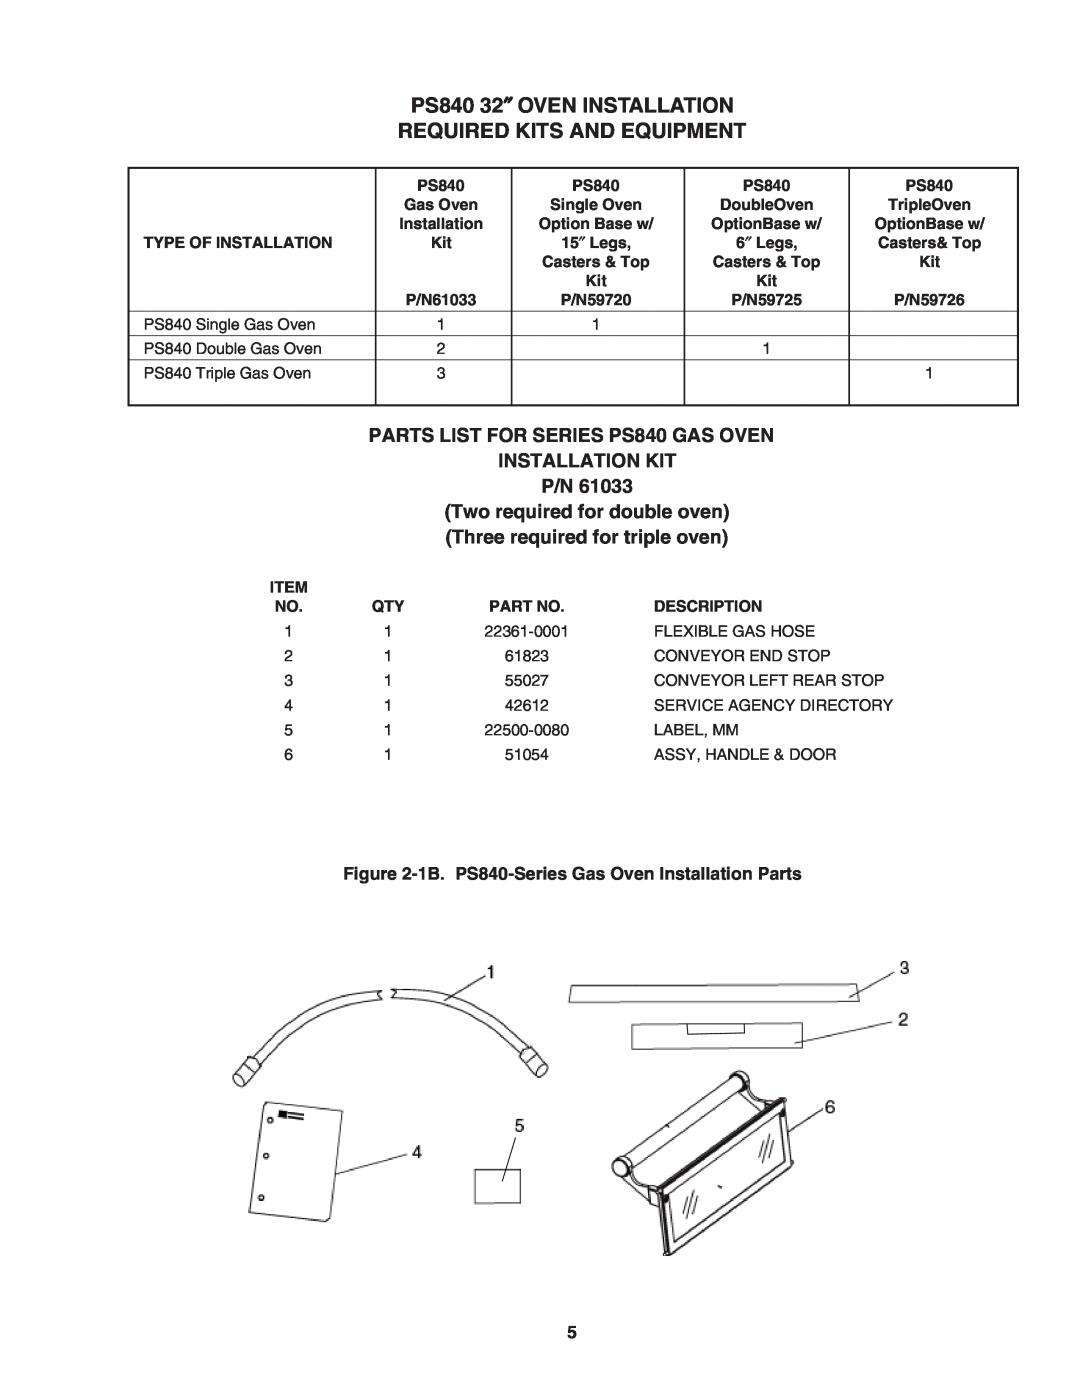 Middleby Marshall PS840 Series PS840 32″ OVEN INSTALLATION REQUIRED KITS AND EQUIPMENT, P/N61033, P/N59720, P/N59725 